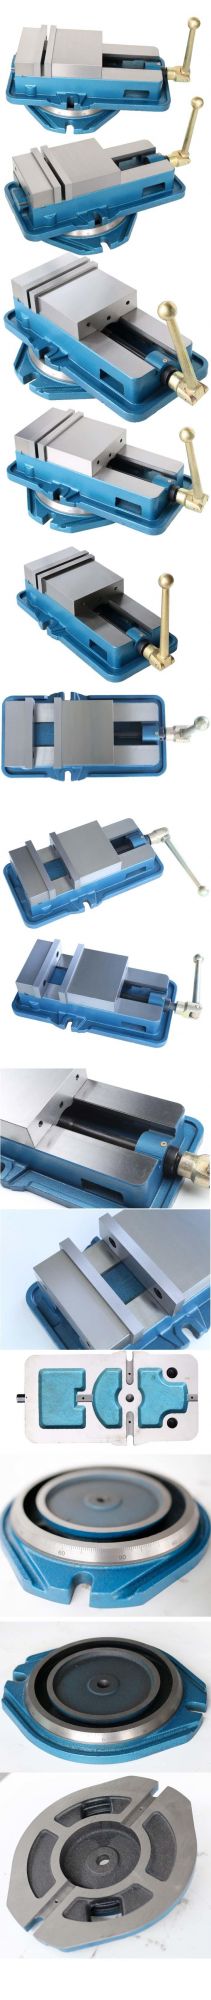 Qm16160lf Drilling Vise with Fixed Base